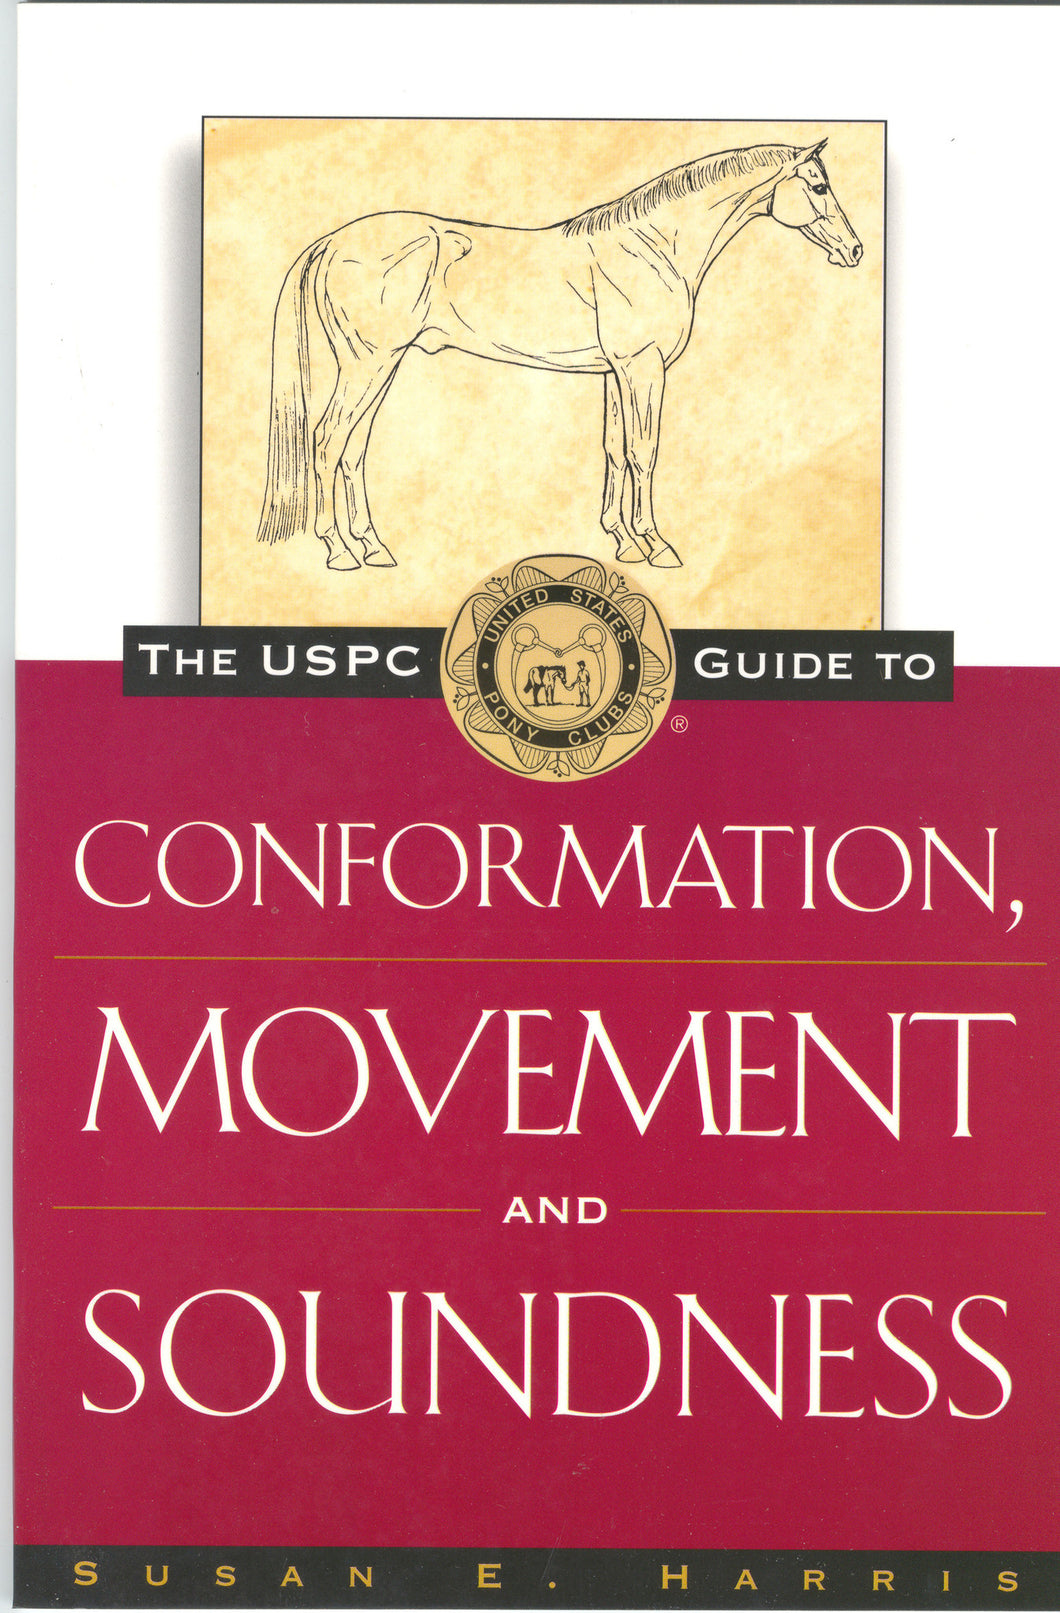 The USPC Guide to Conformation, Movement, and Soundness